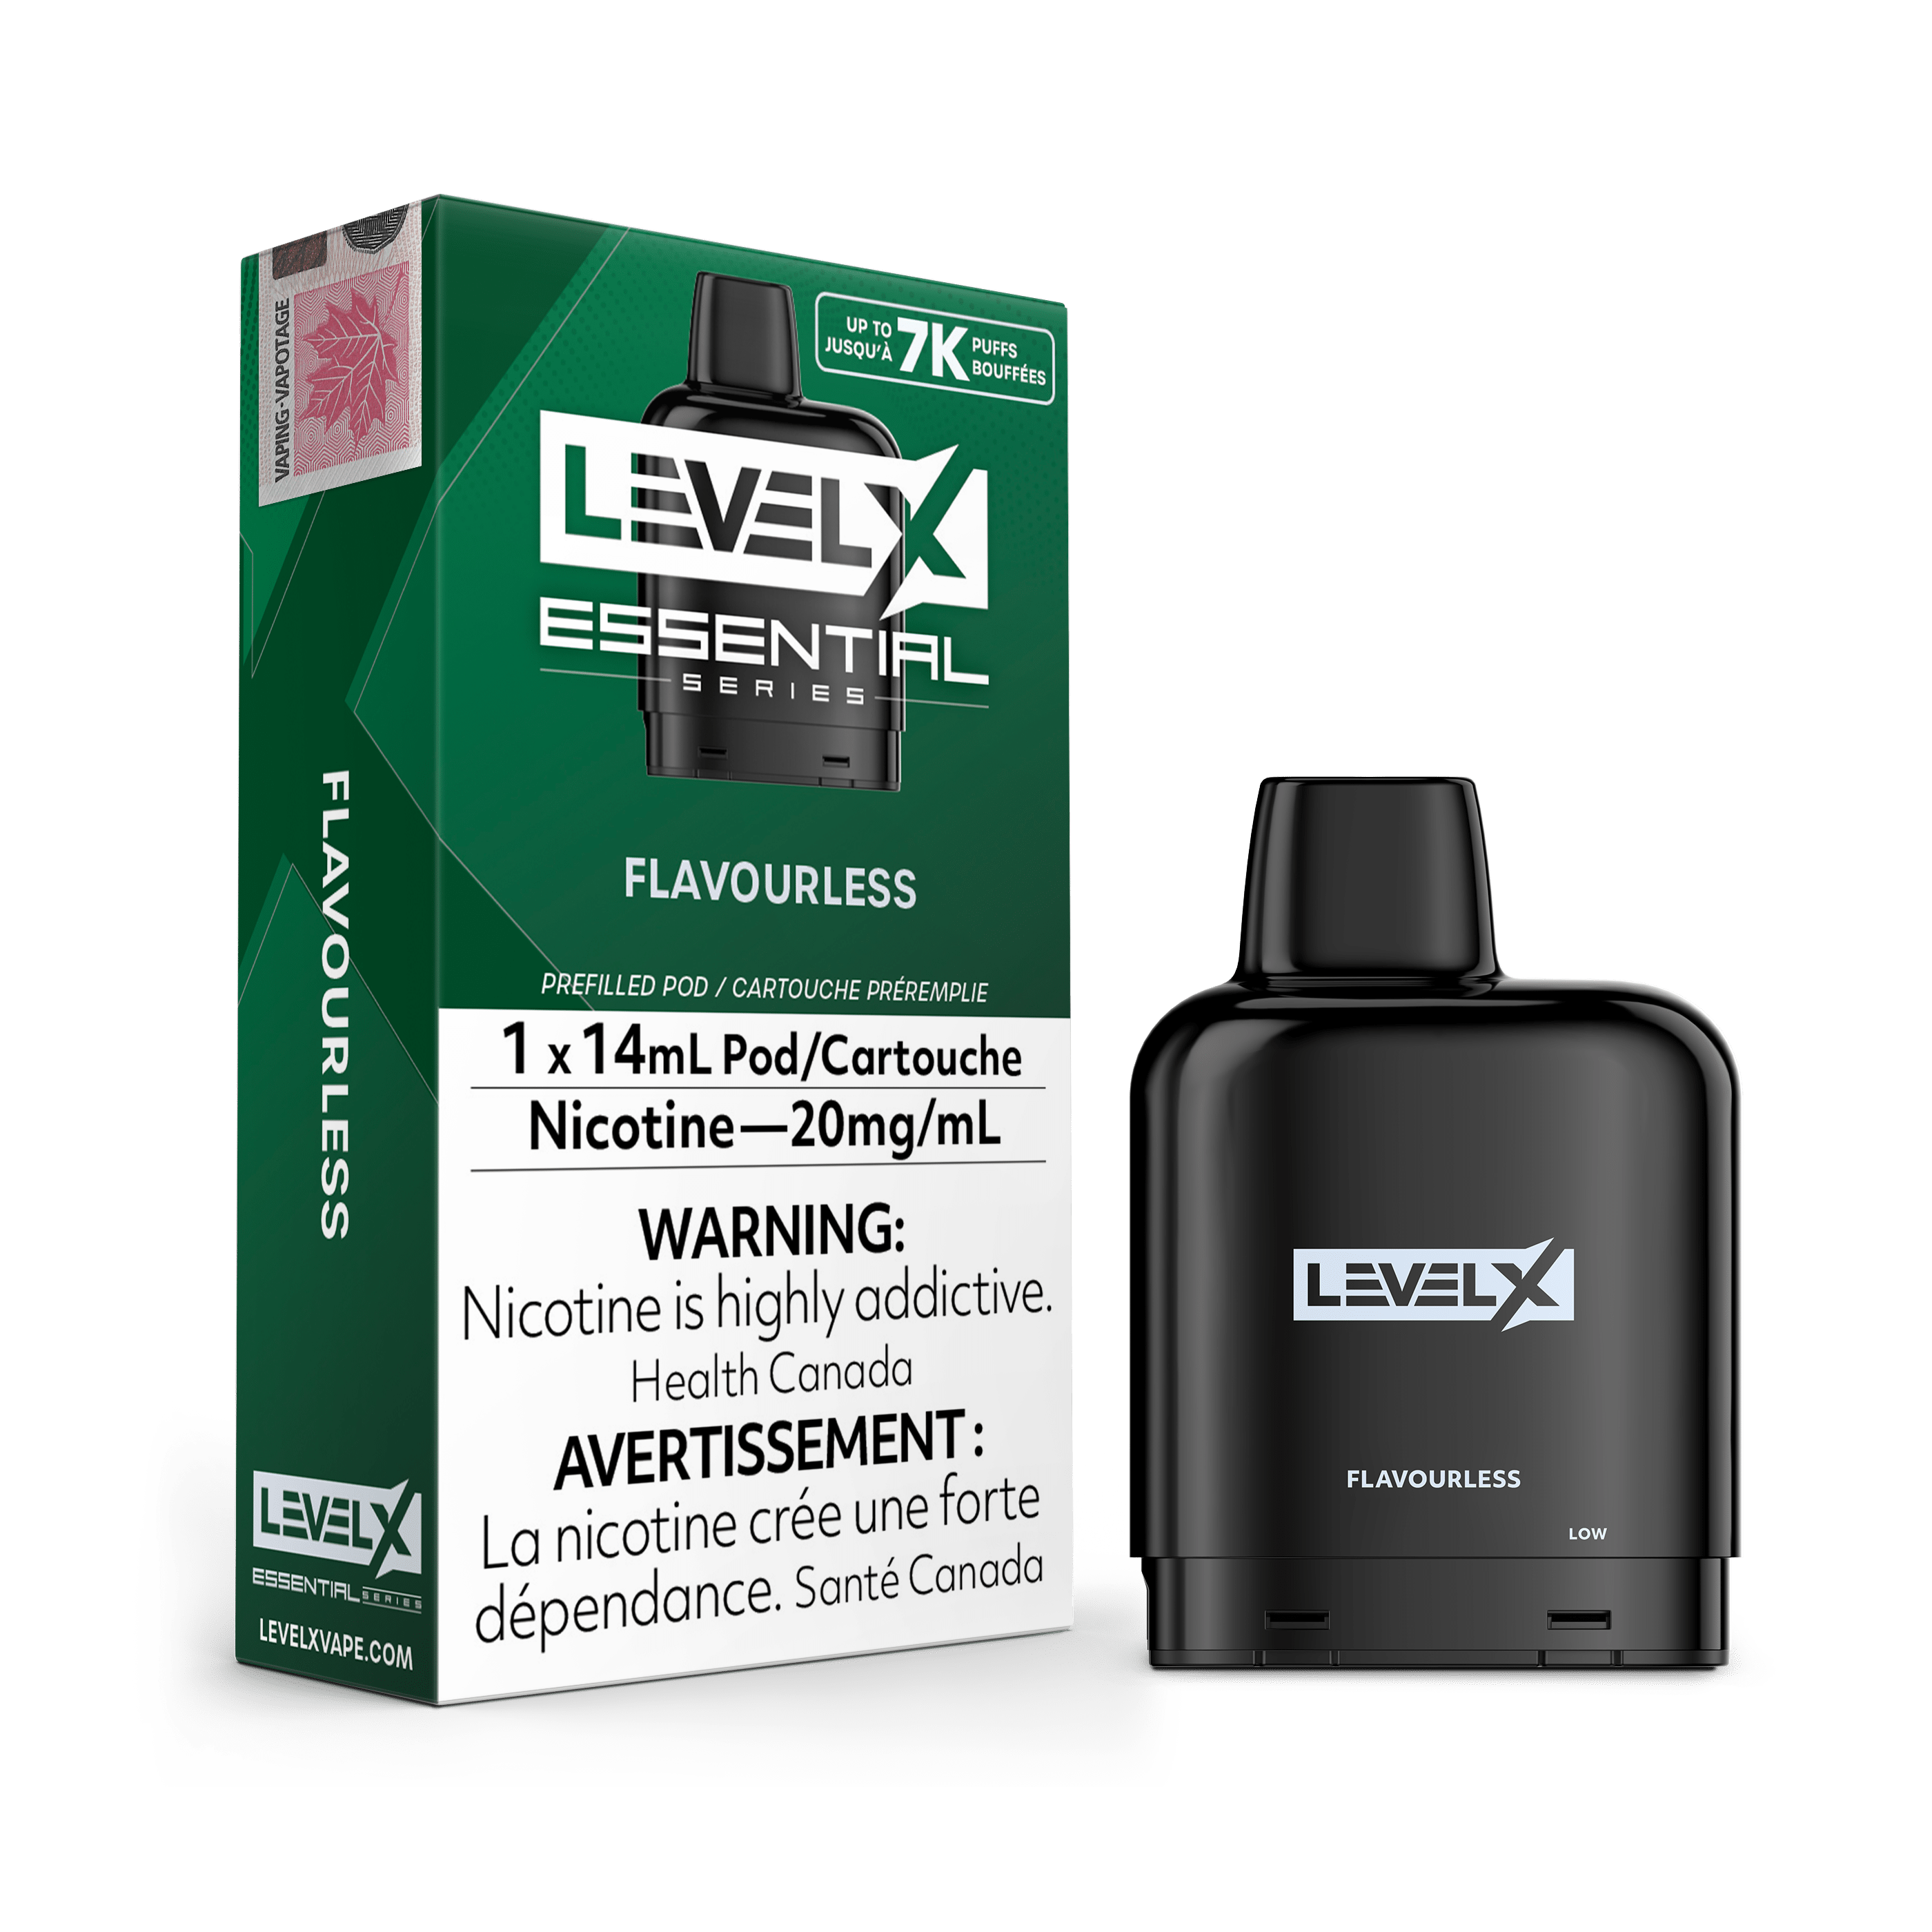 Level X Essential Series Pod - Flavourless available on Canada online vape shop